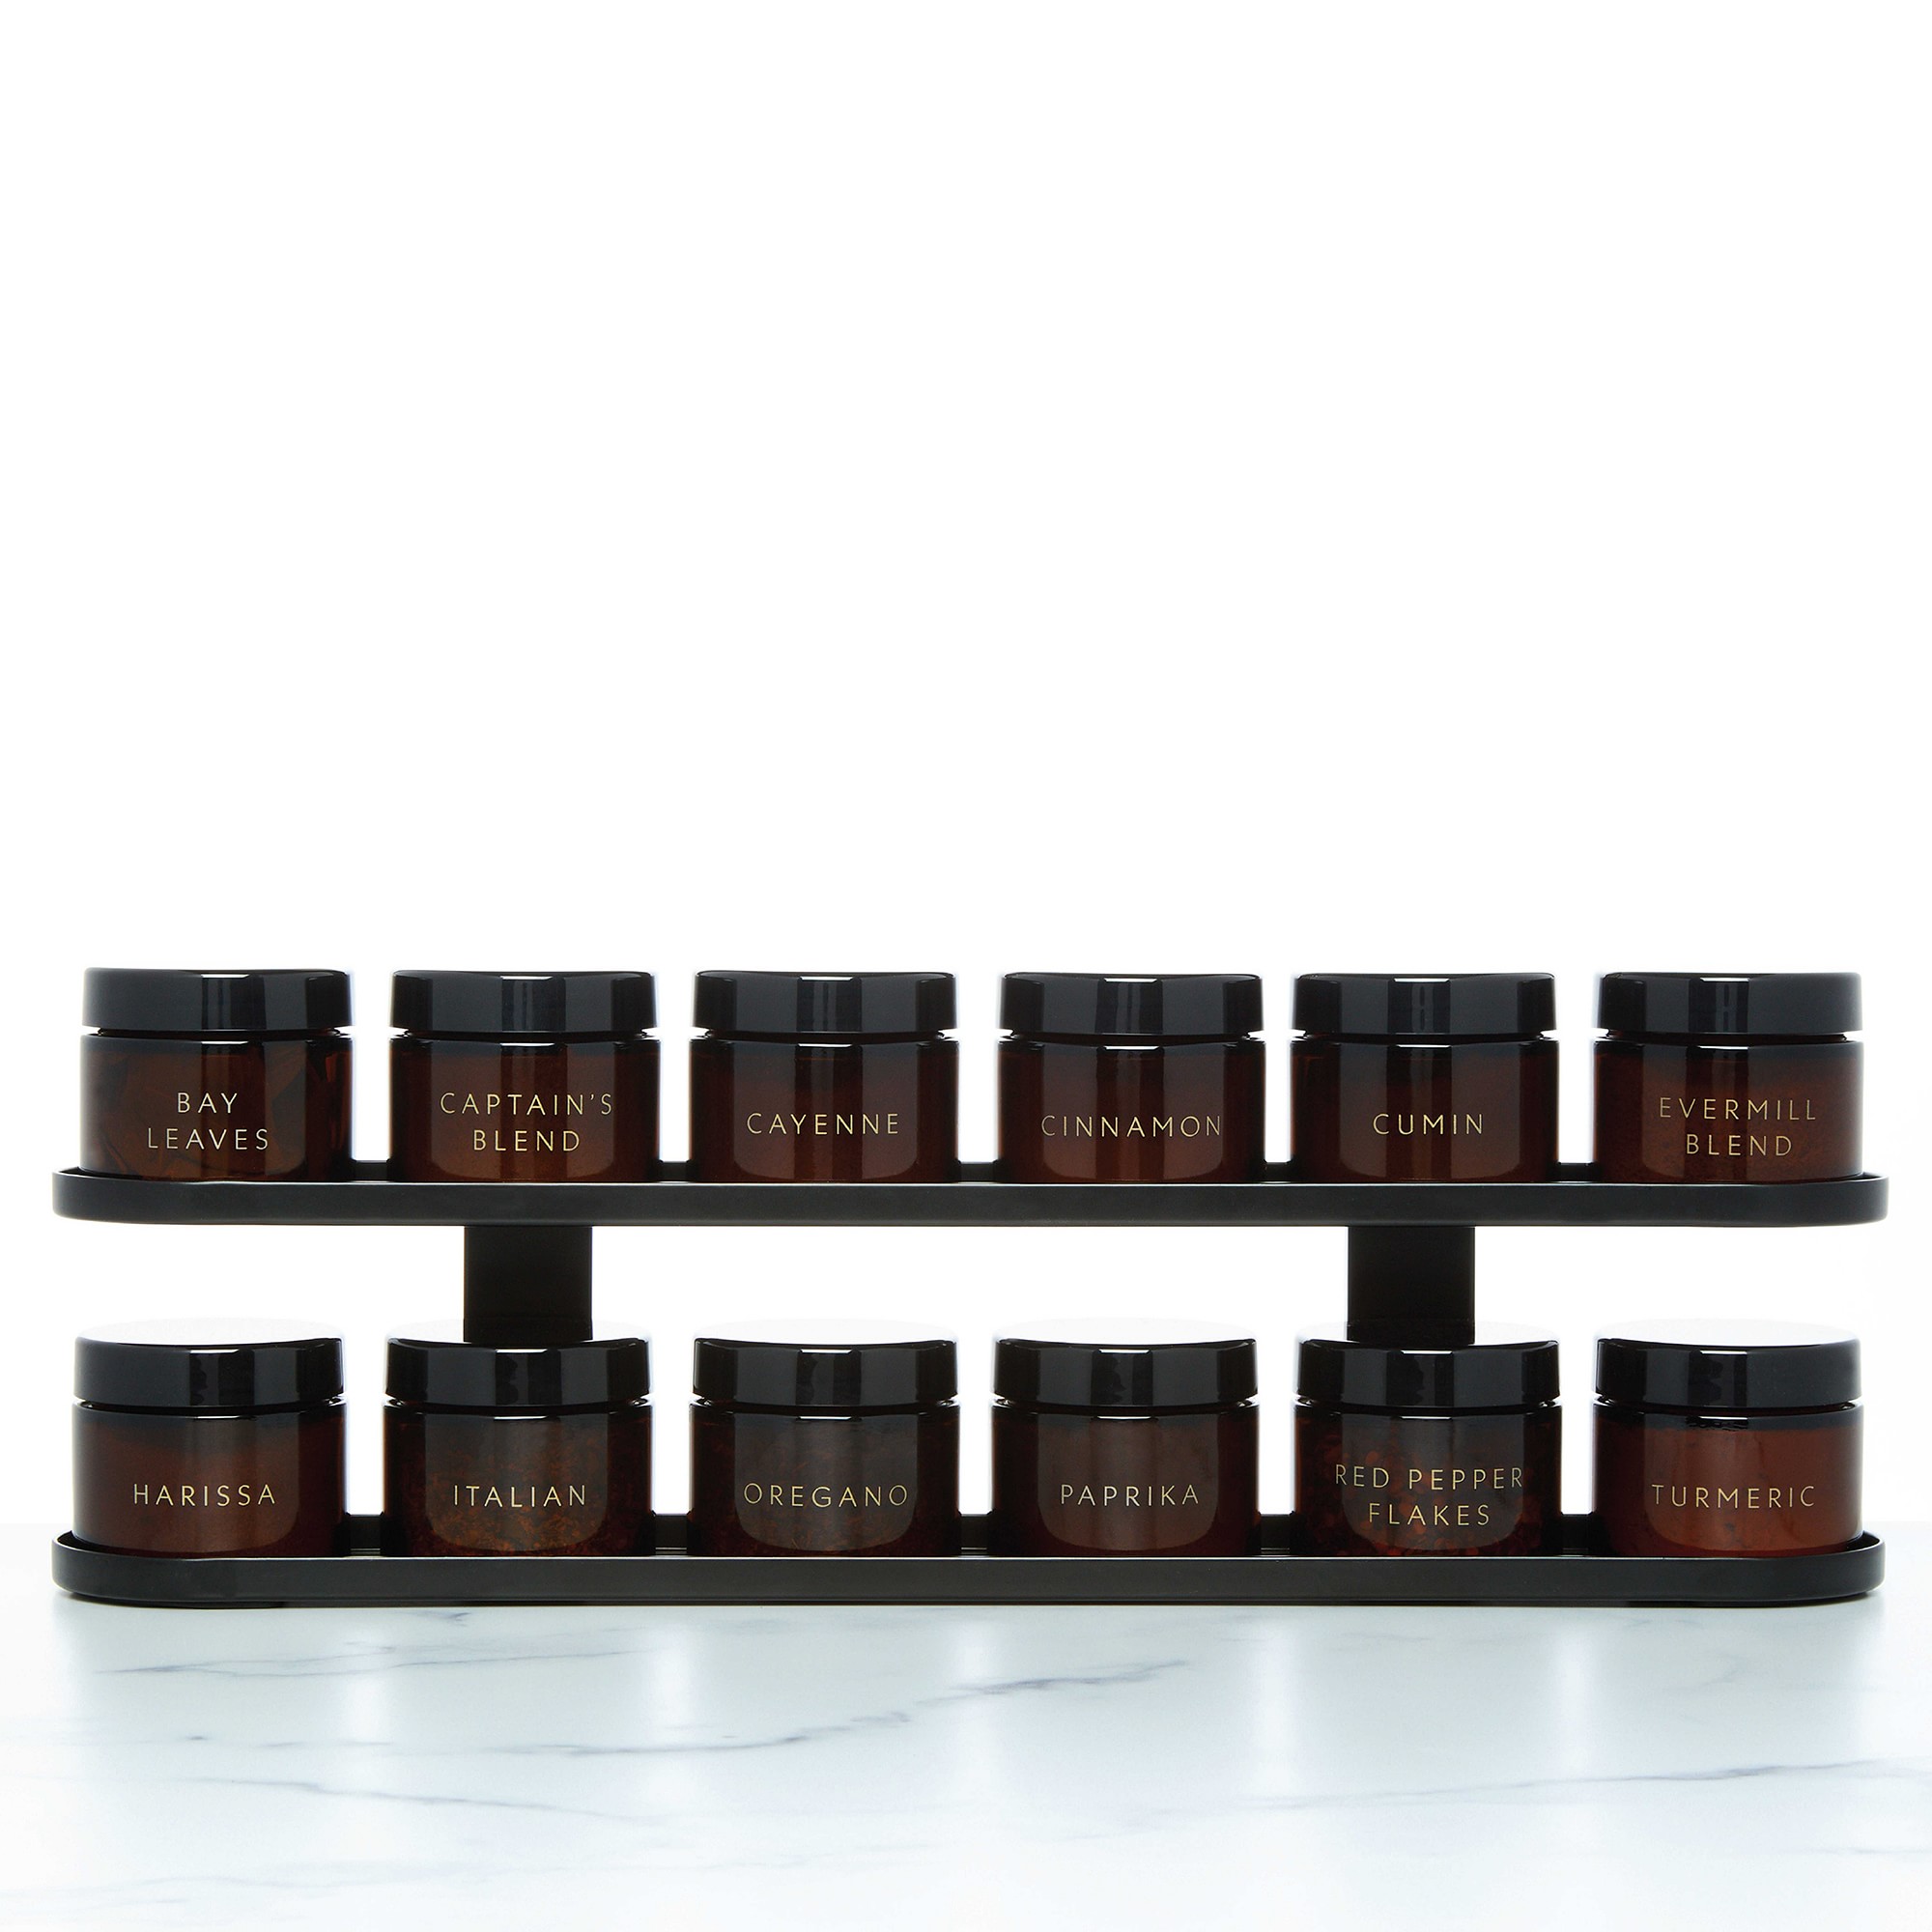 Evermill Core Countertop Spice Rack with Spices